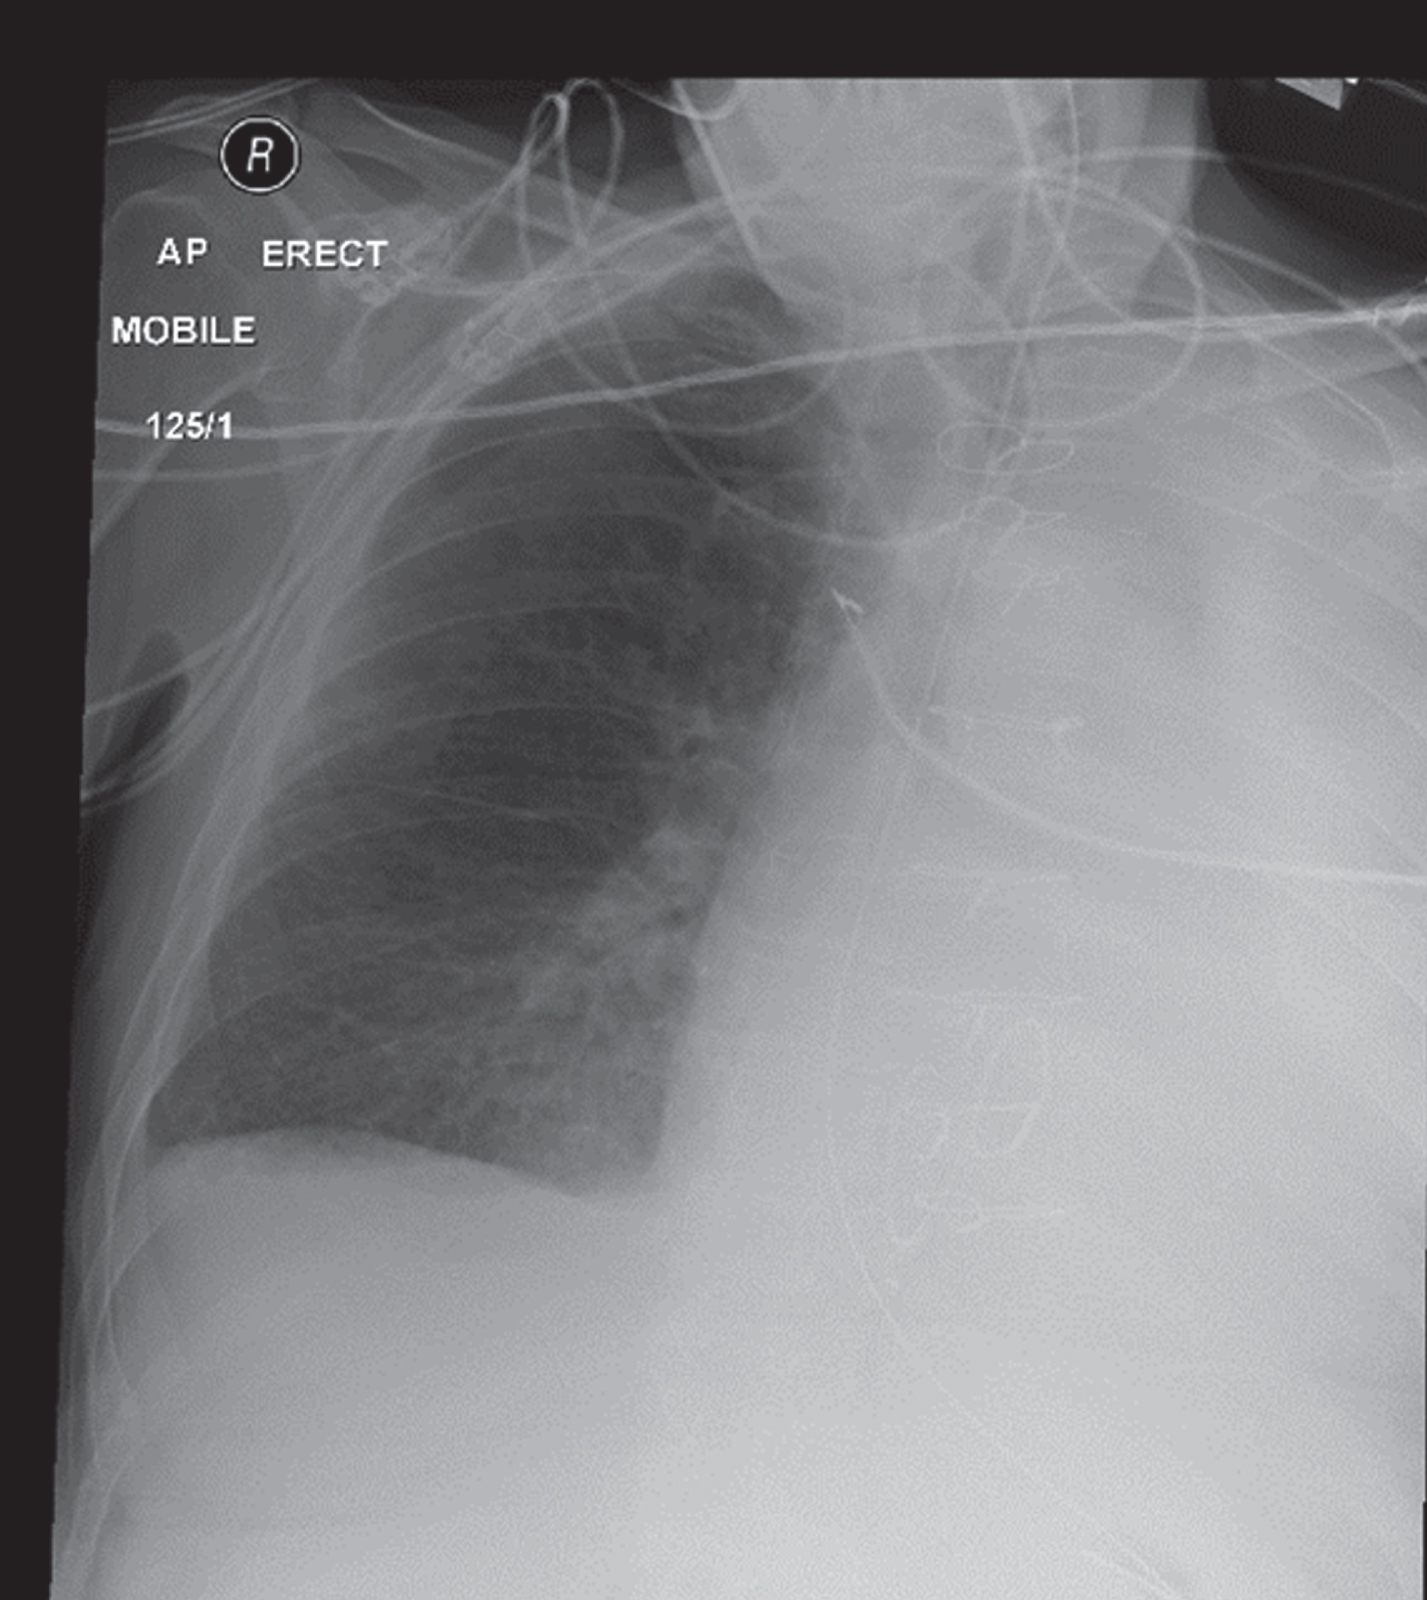 Hemithorax white-out (differential)